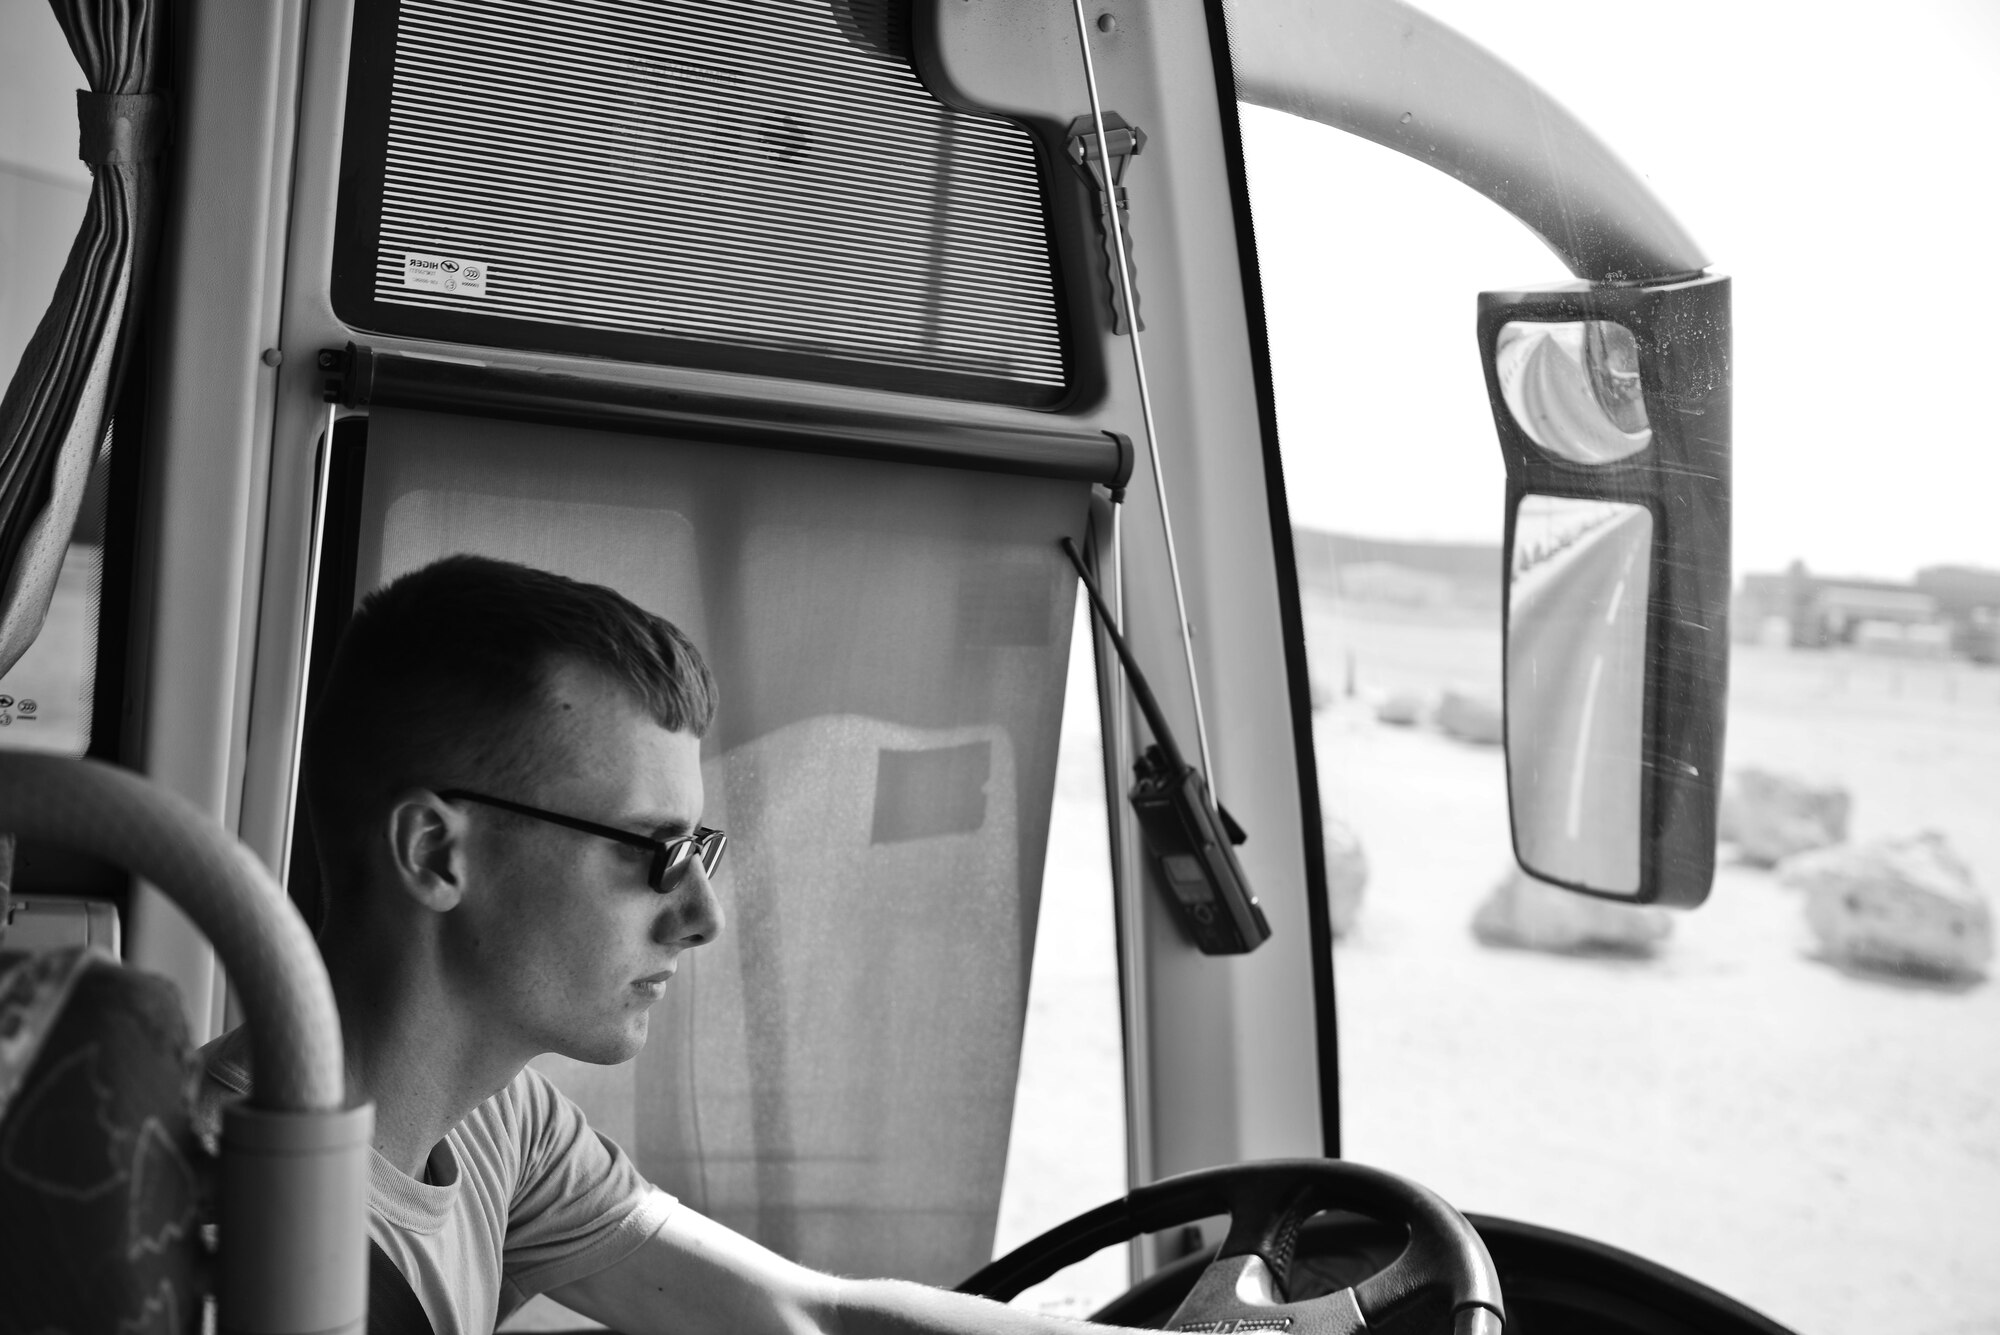 Senior Airman Daniel Wensel, Expeditionary Logistics Readiness Squadron, operates a base shuttle for deployed members June 30, 2015 at Al Udeid Air Base, Qatar. The airmen from the 379th ELRS provide public transportation to over 2,500 deployed members from all services and branches on a daily basis to alleviate traffic and provide transportation to living quarters, dining facilities and various work areas.  (U.S. Air Force photo/ Staff Sgt. Alexandre Montes)